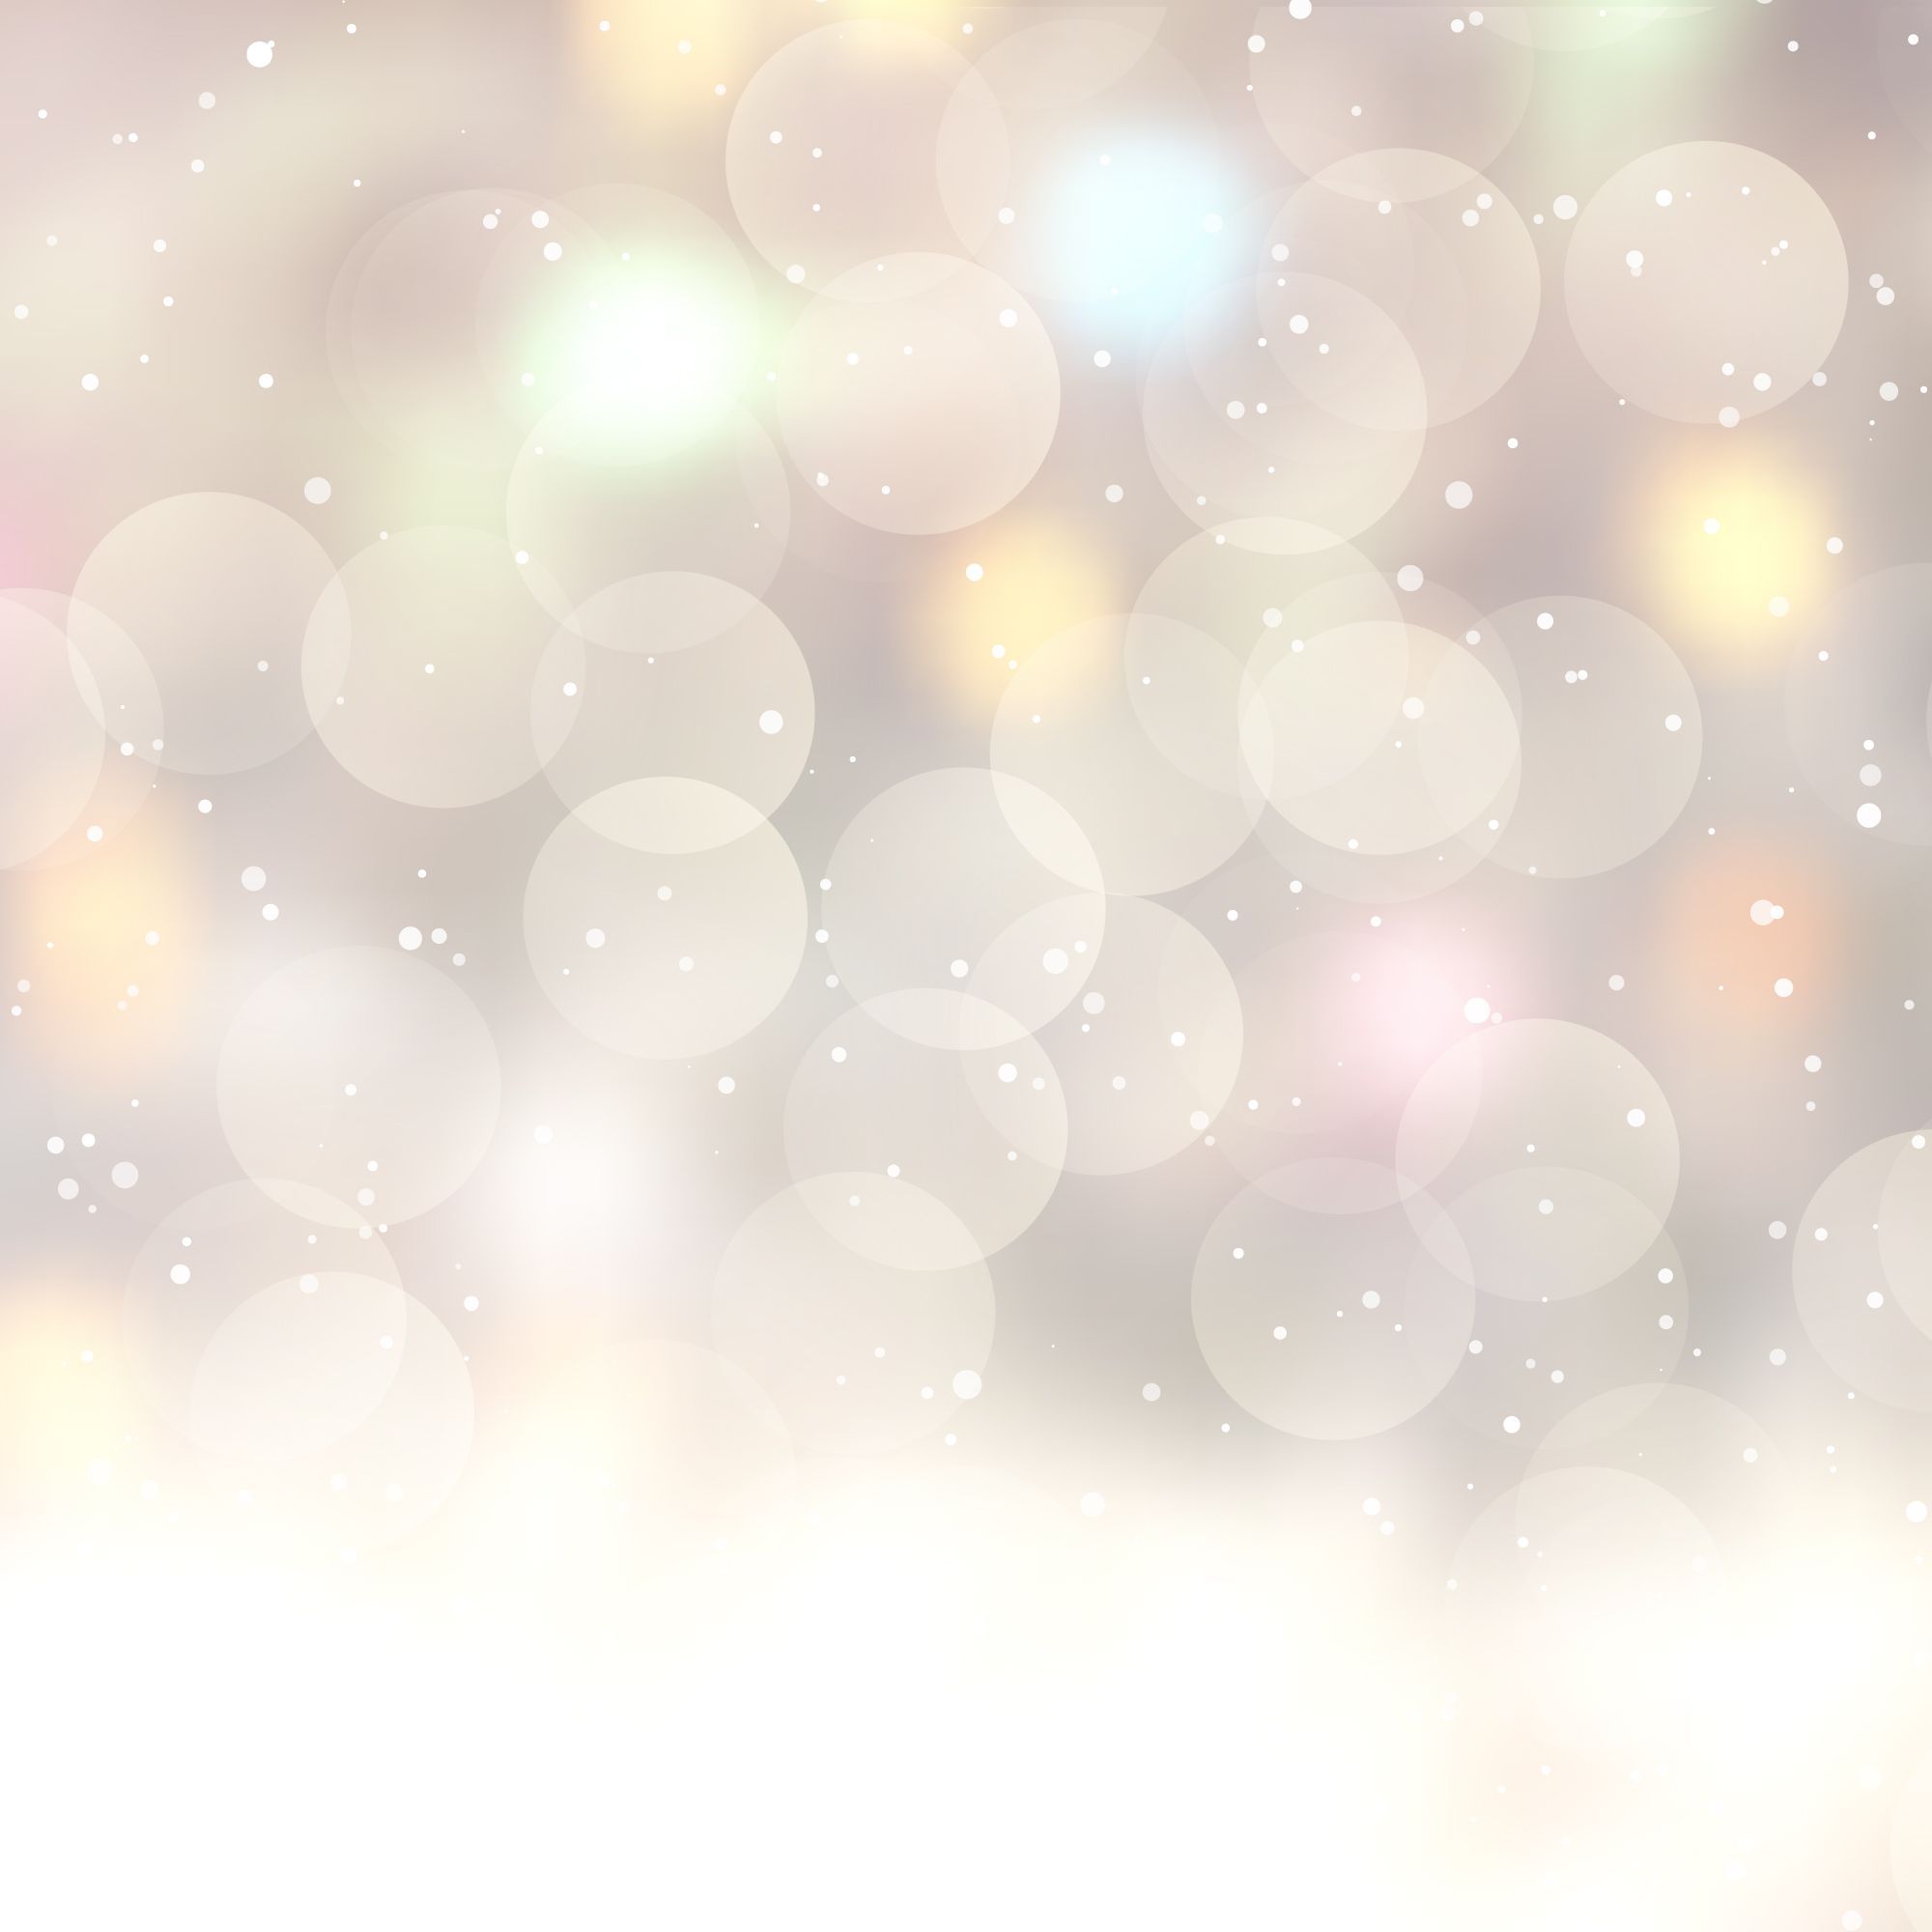 A silver bokeh background with a white border - Pattern, YouTube, design, cool